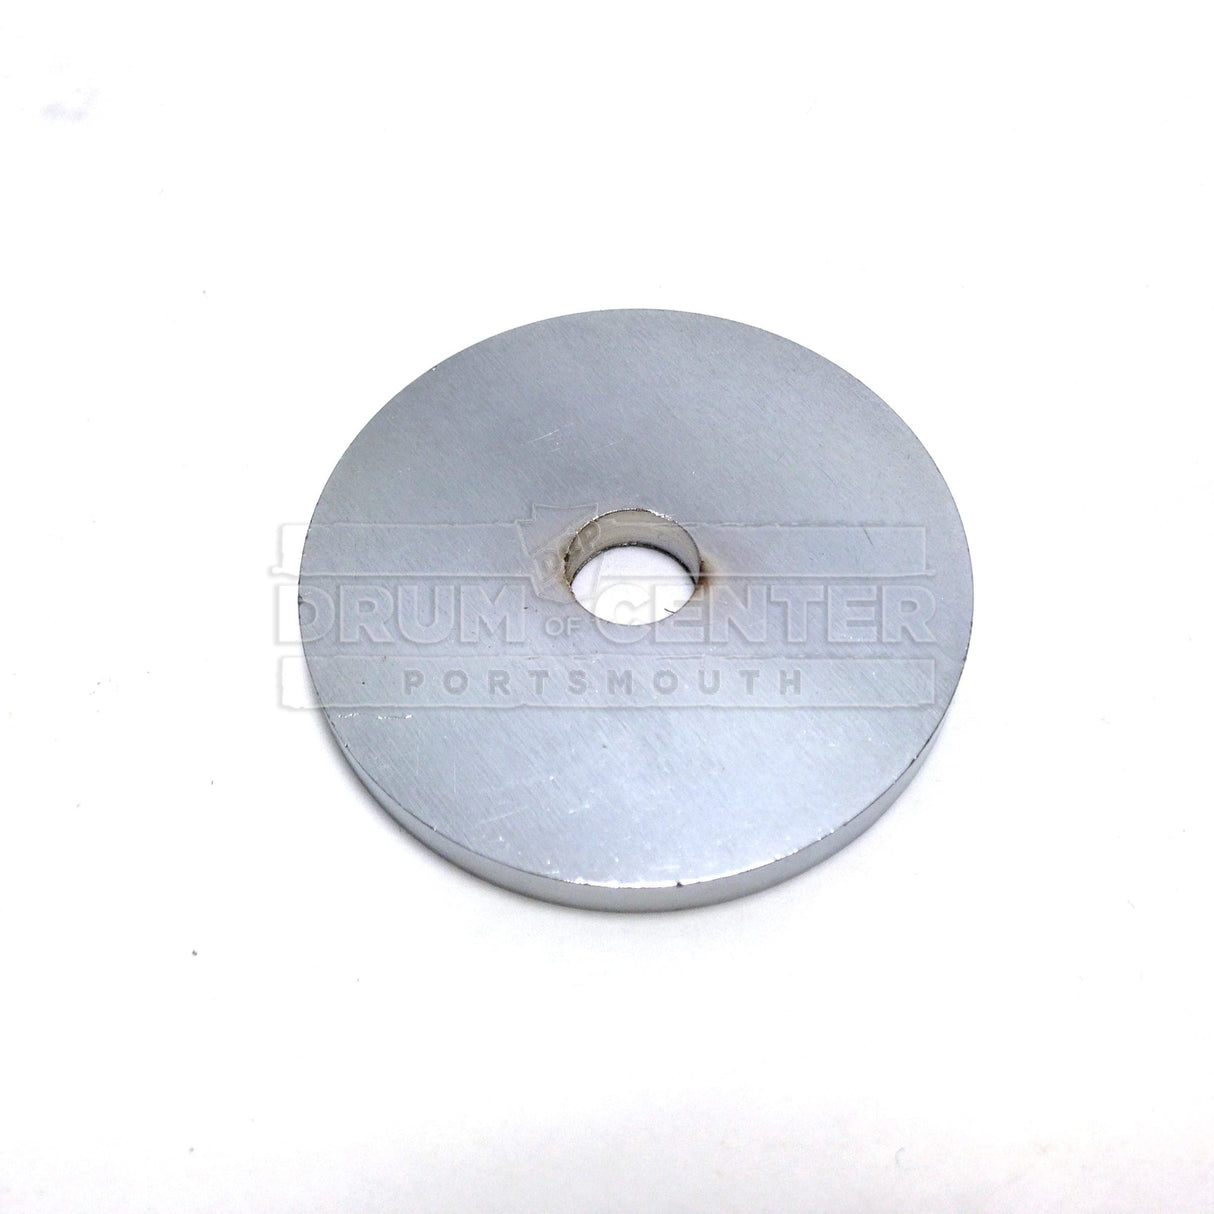 DW Parts : 1 5/8 Steel Washer For 9300